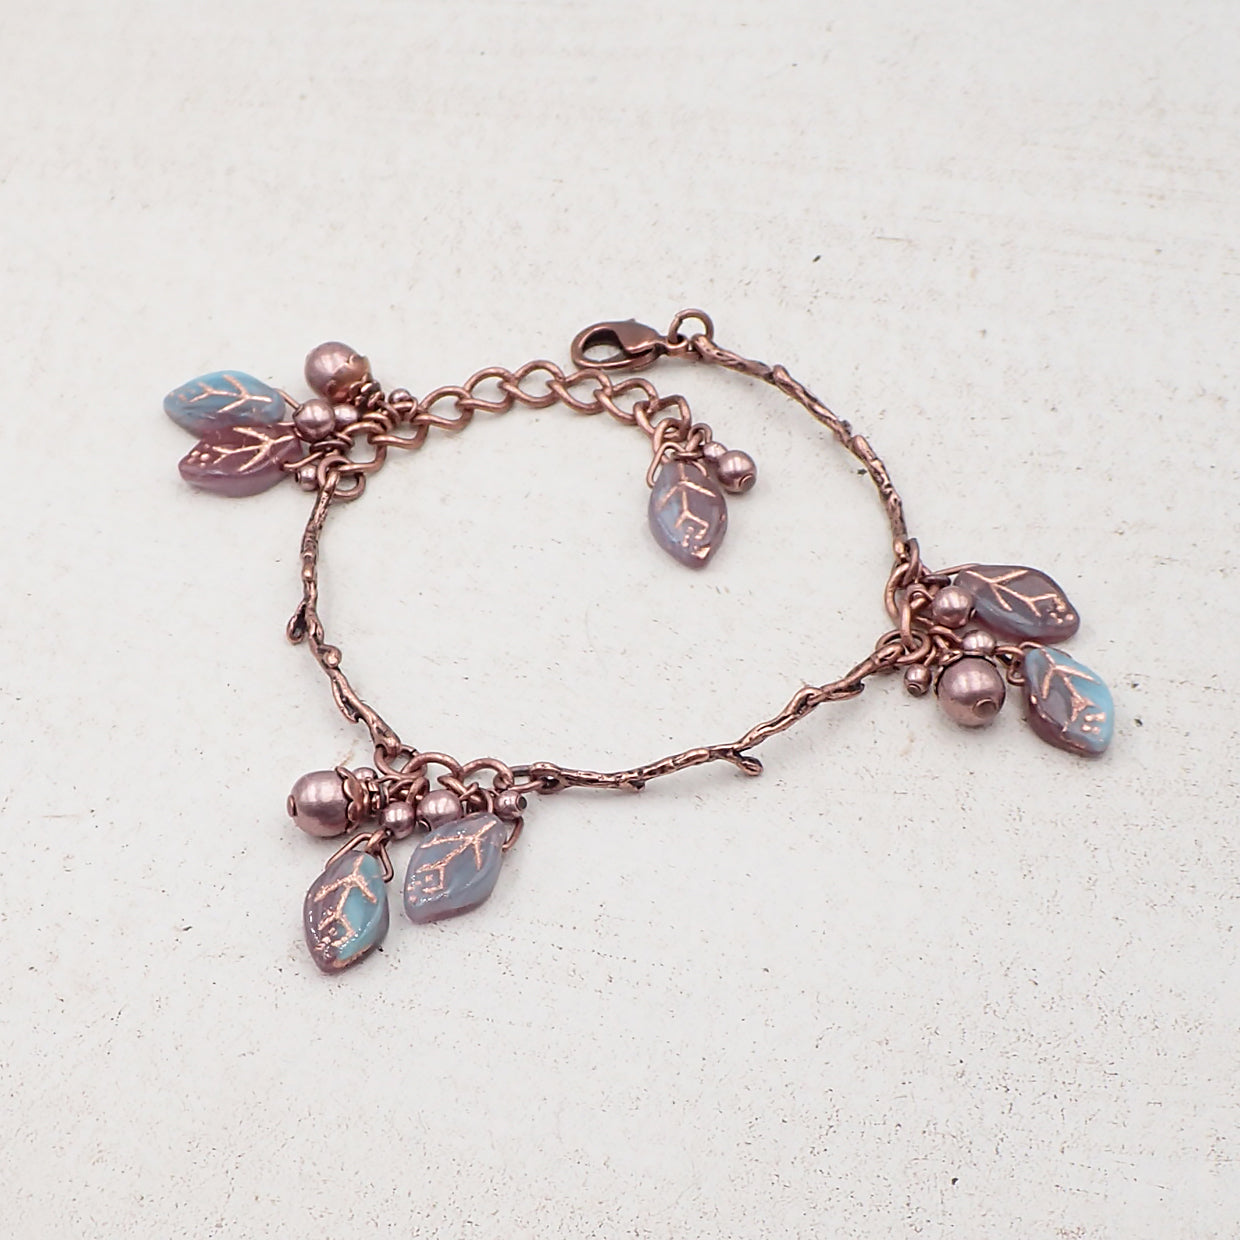 Boho Branch Bracelet Handmade with Aqua and Purple Artisan Czech Glass Leaf Beads and Antiqued Copper